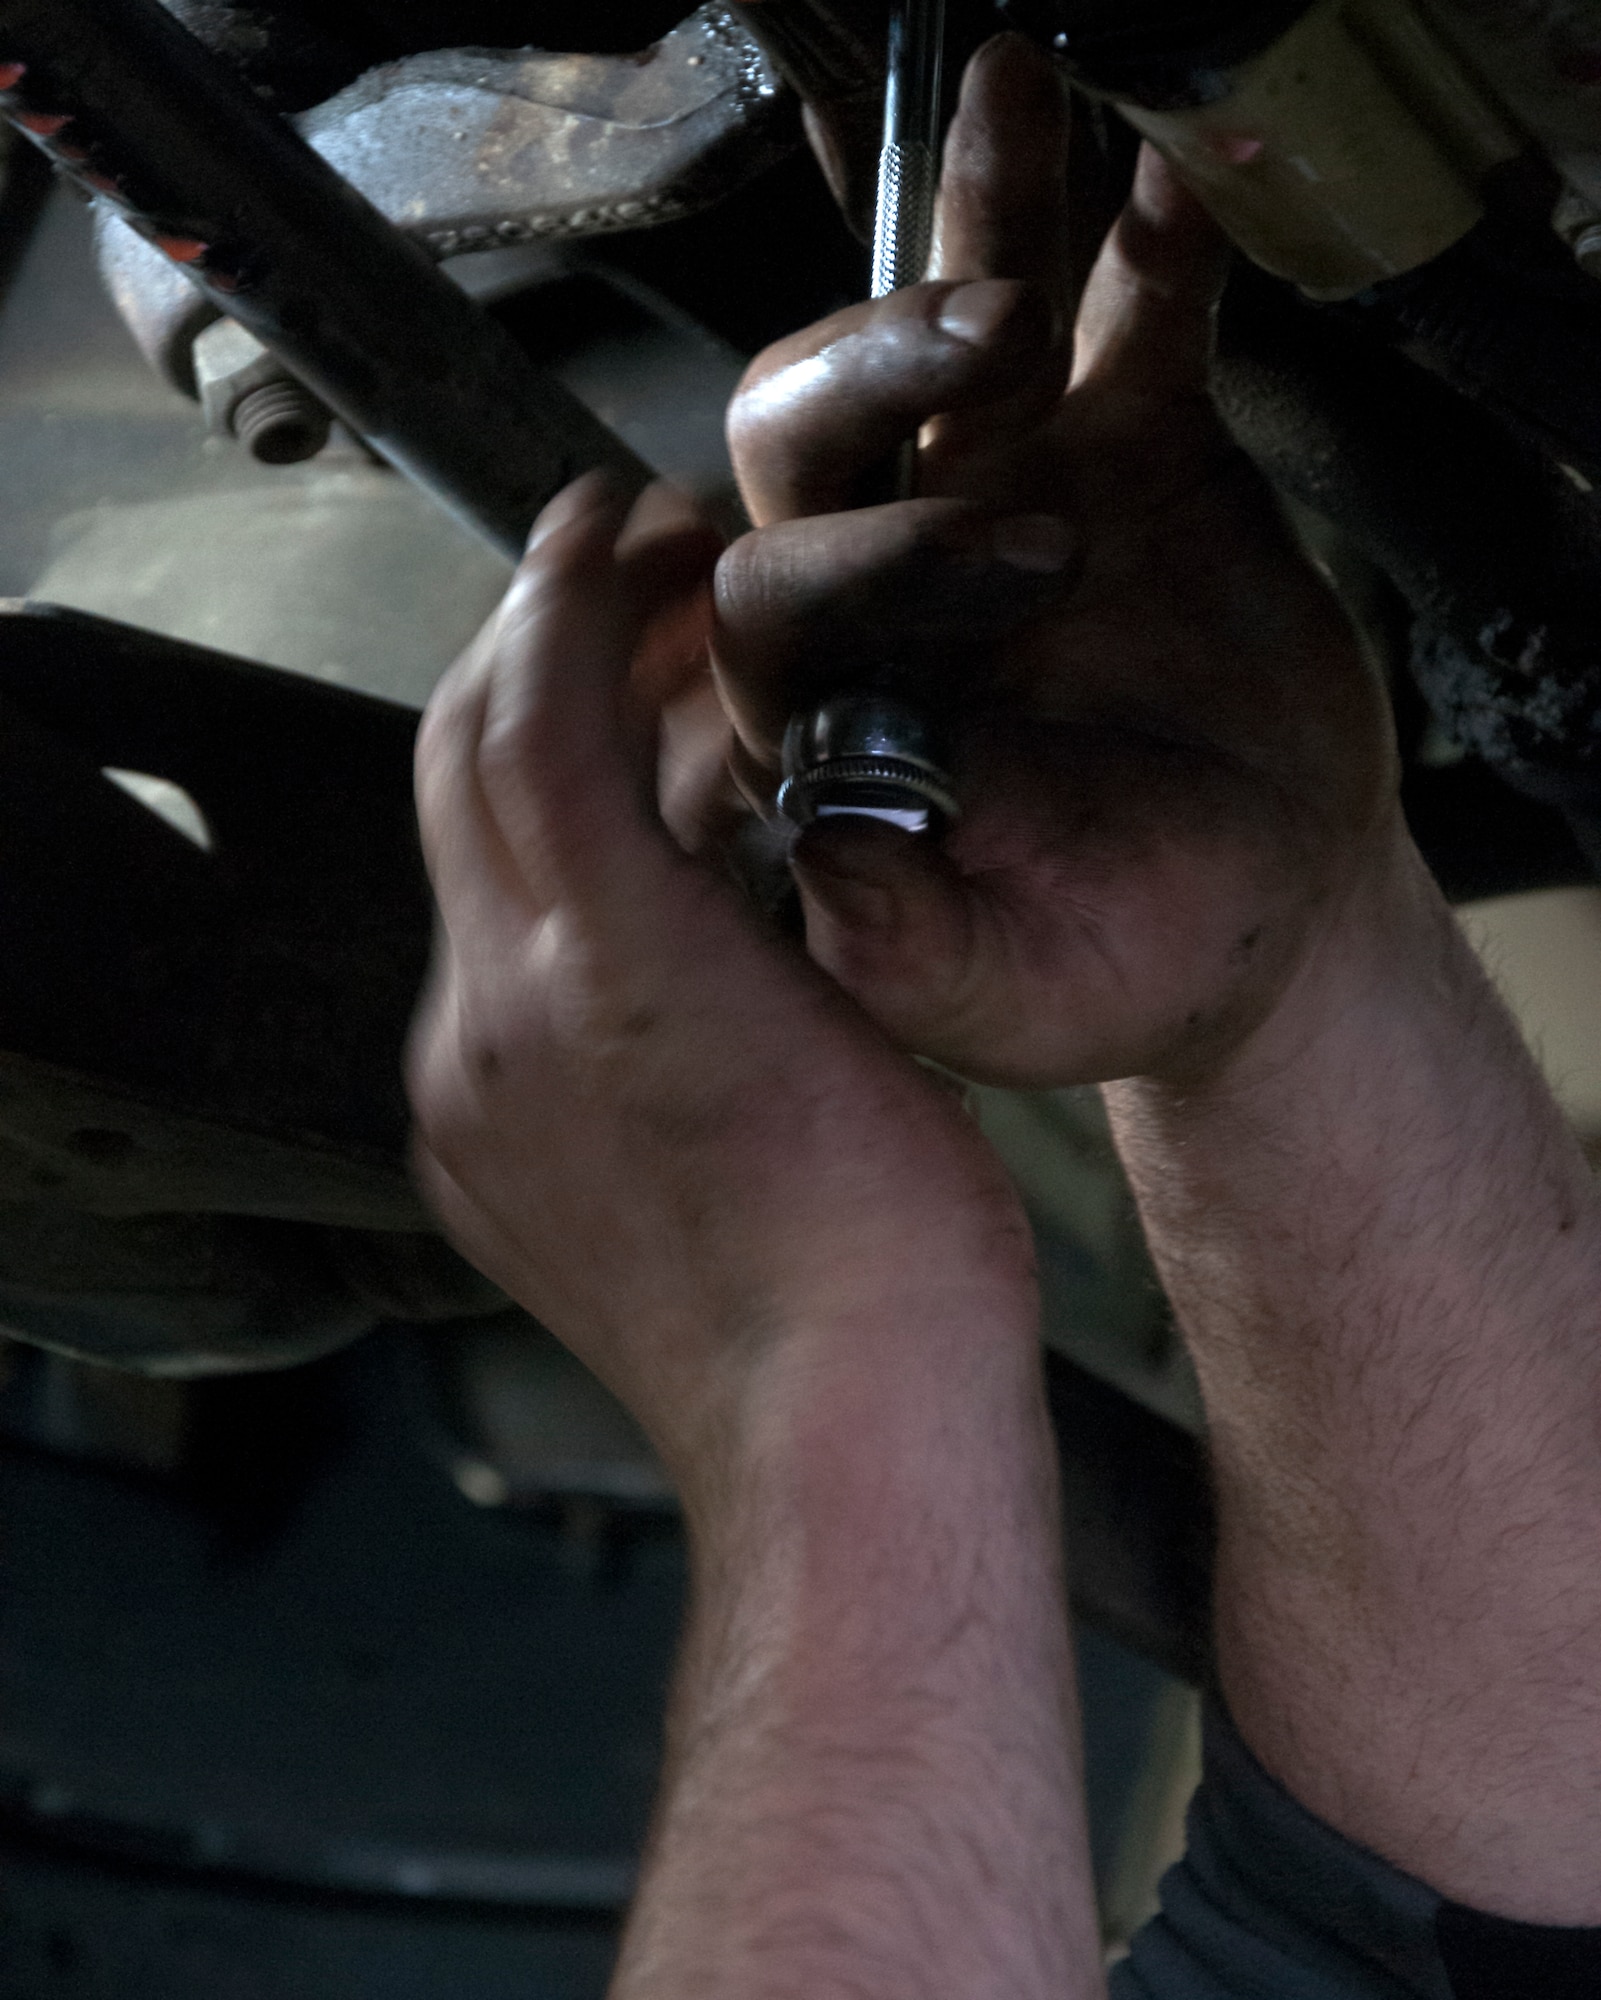 Retired Tech. Sgt. Timothy Staples removes a bolt from the underside of a truck Nov. 13, 2015, in the Auto Skills Shop on F.E. Warren Air Force Base, Wyo. The Auto Skills Shop provides tools and resources that many don’t have access to at home. (U.S. Air Force photo by Senior Airman Brandon Valle)